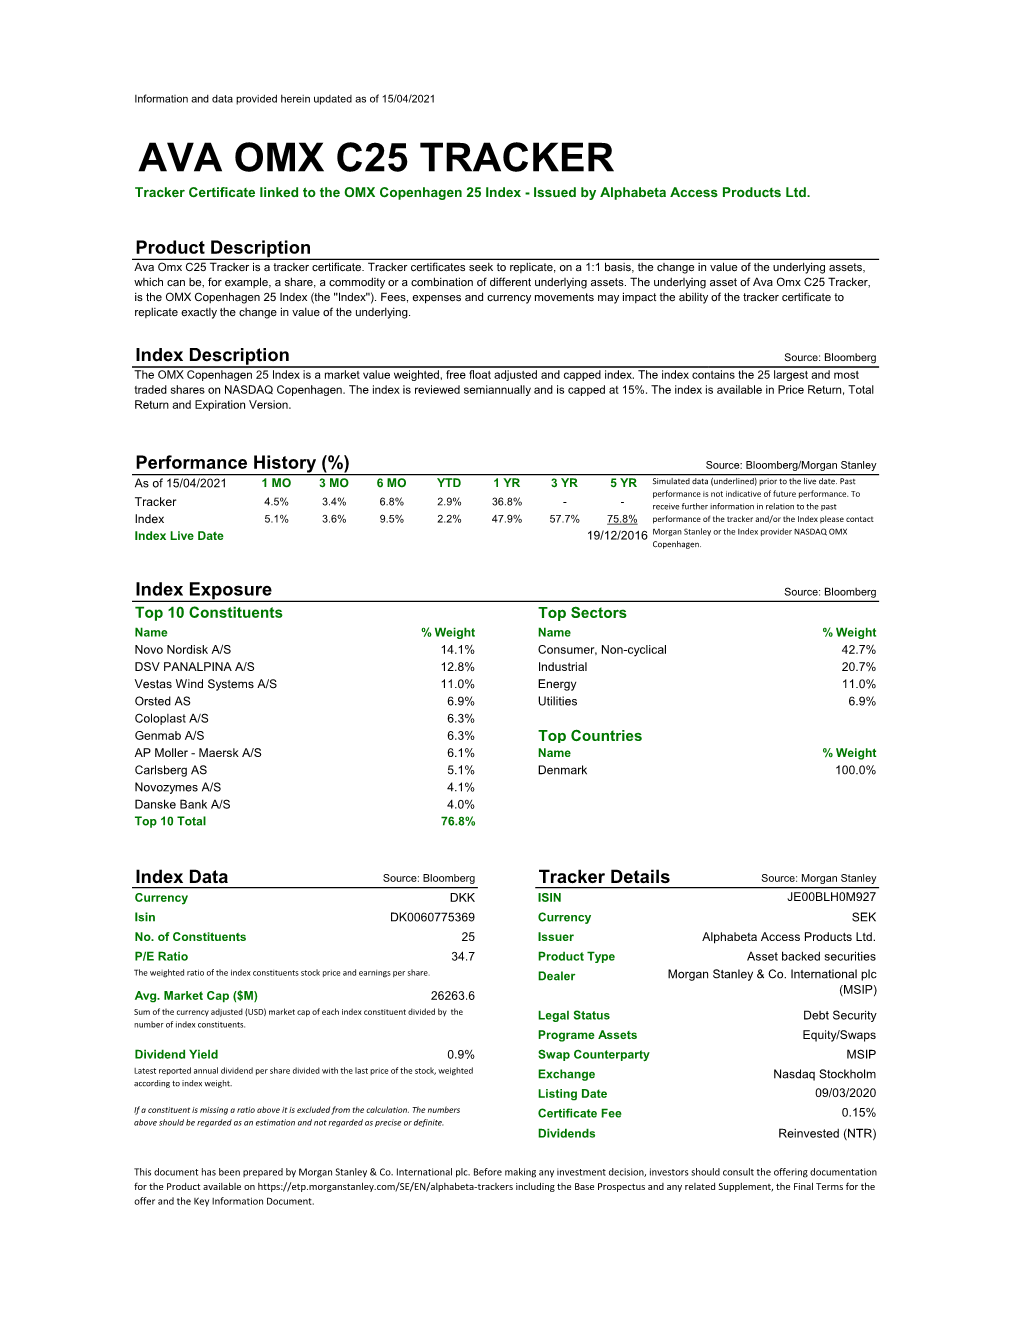 AVA OMX C25 TRACKER Tracker Certificate Linked to the OMX Copenhagen 25 Index - Issued by Alphabeta Access Products Ltd